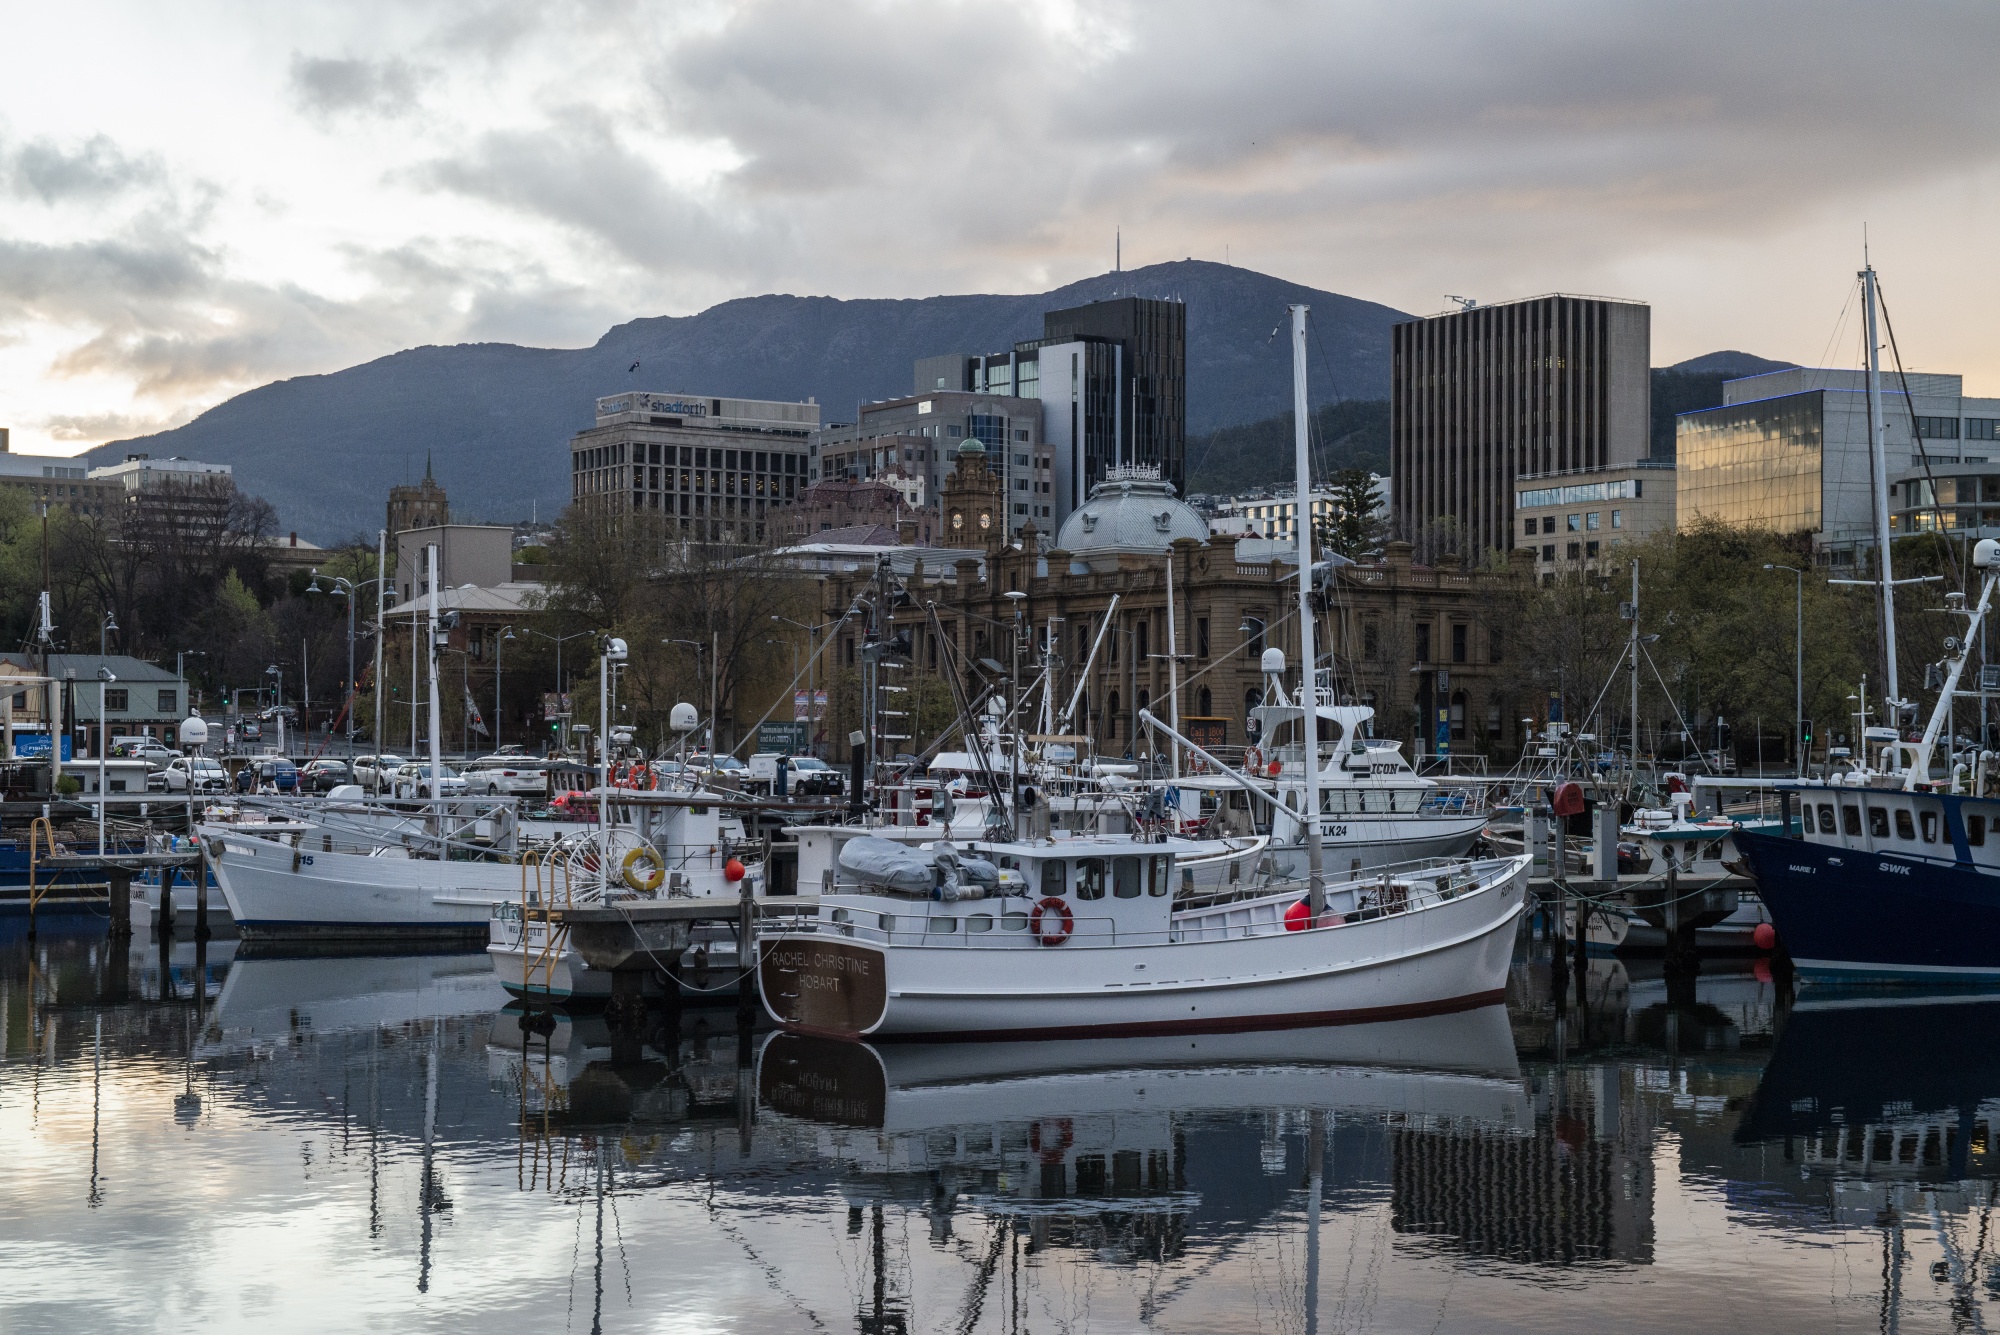 Boats are moored by the city centre, in Hobart, Tasmania on Sept. 21.